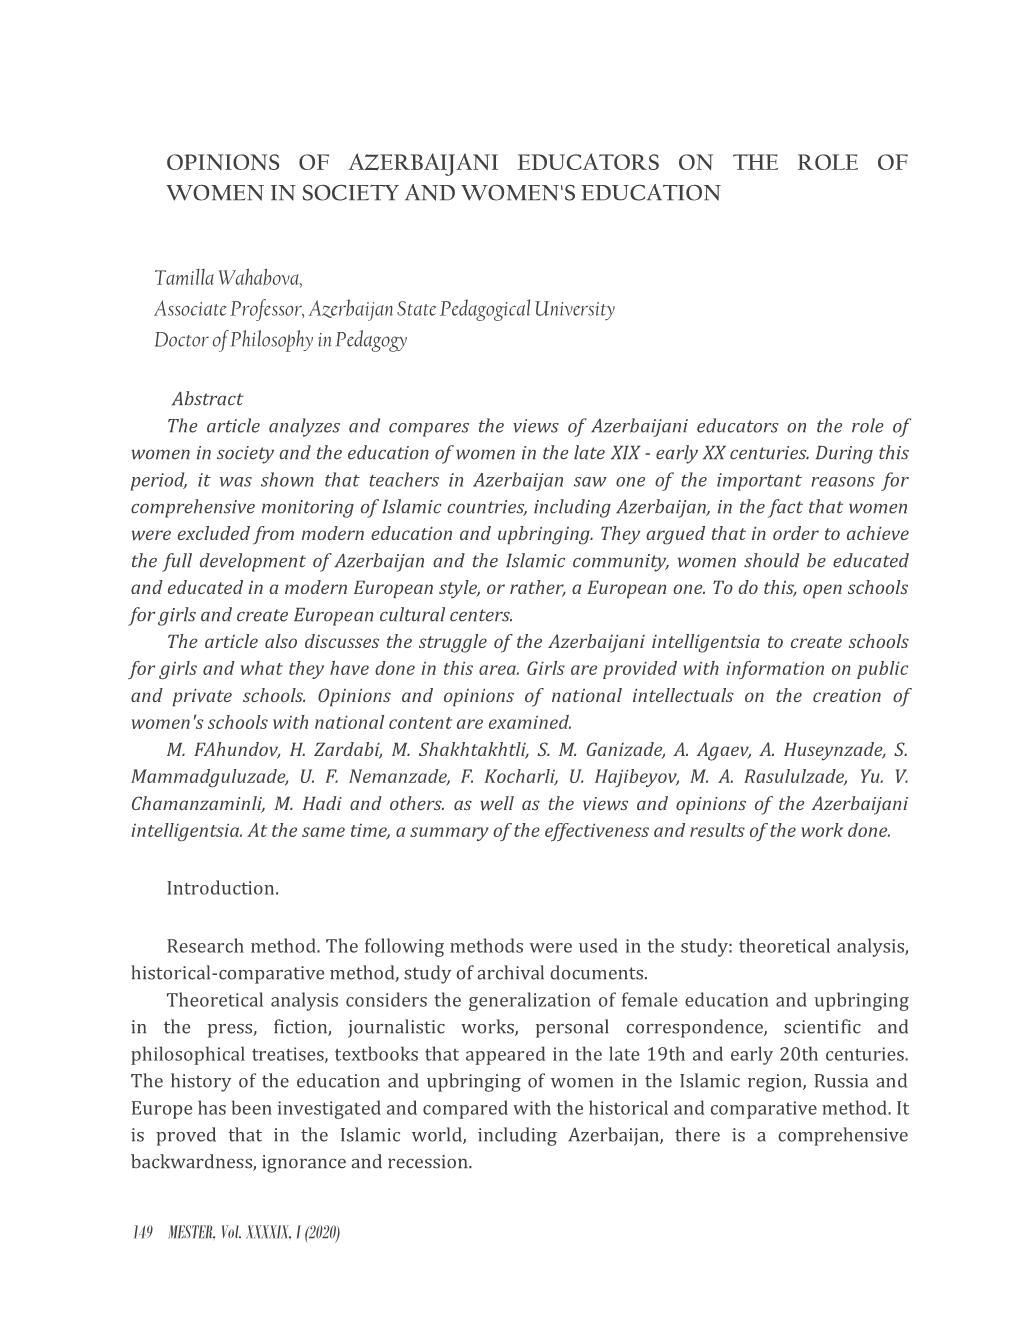 Opinions of Azerbaijani Educators on the Role of Women in Society and Women's Education